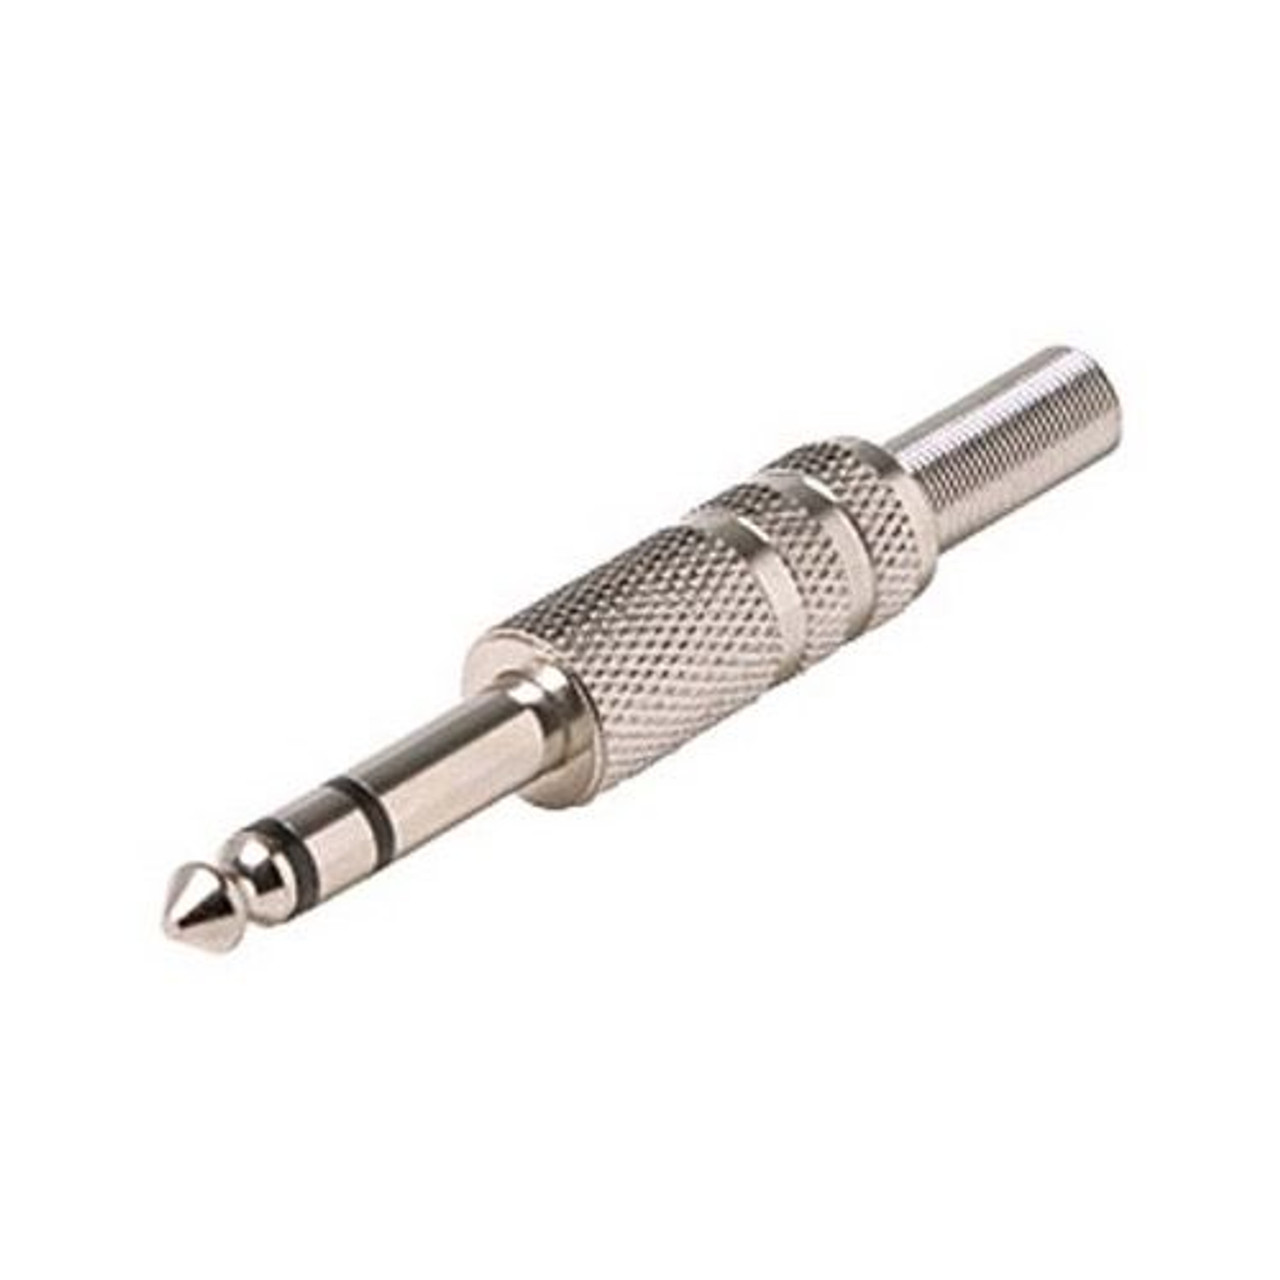 Steren 250-115 1/4" Stereo Plug Male Audio Connector Nickel Plate with Spring Relief Sleeve Shielded Solder Terminal 1/4 Male Stereo Audio Video Jack Plug Connector Adapter A/V Connector, Part # 250115